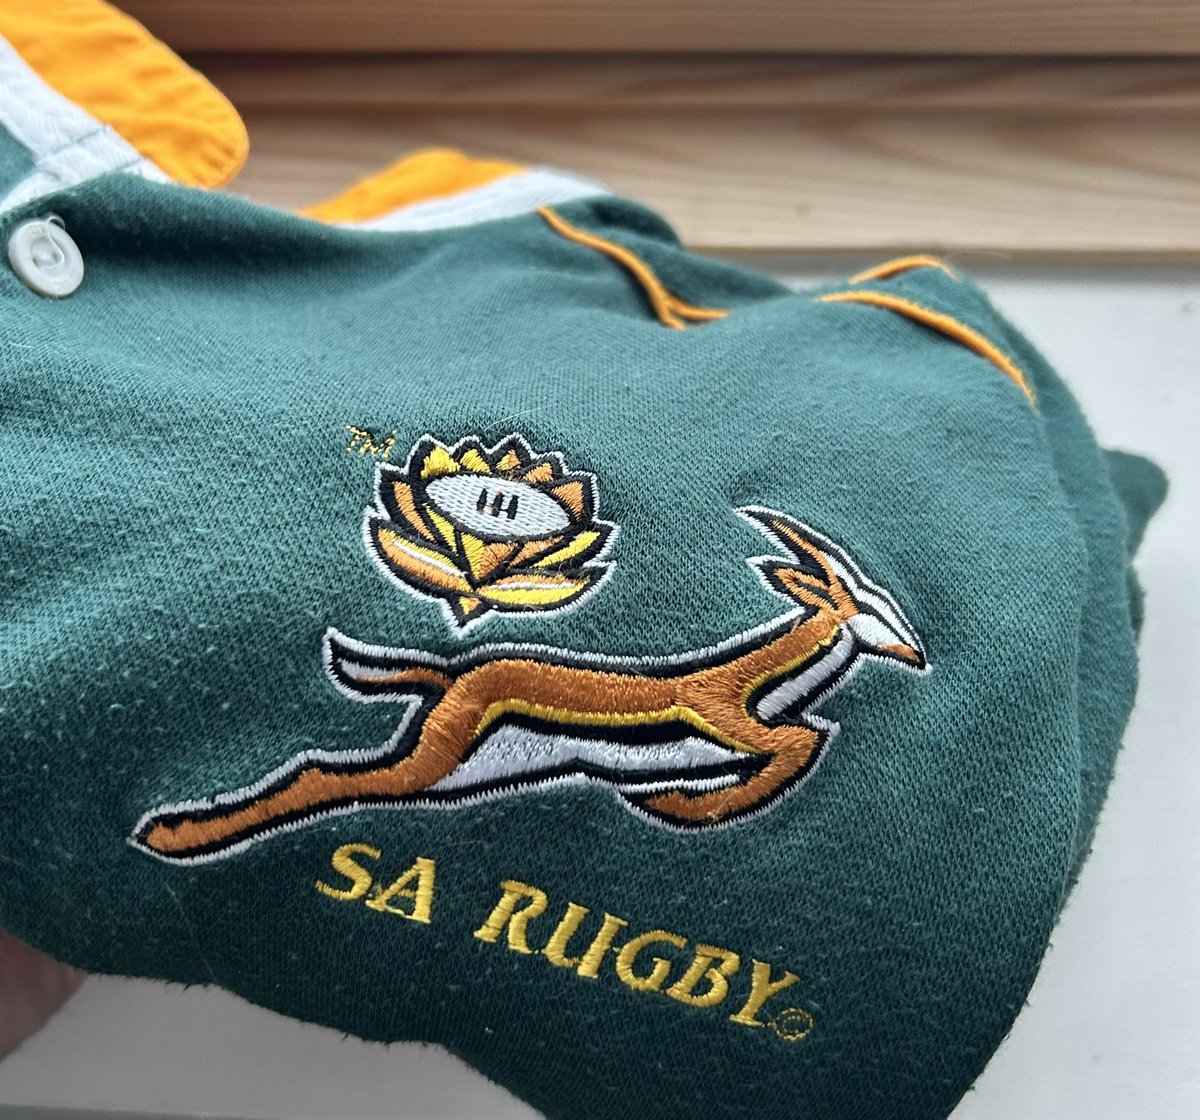 That’s my outfit sorted for tonight. 🇿🇦🏉